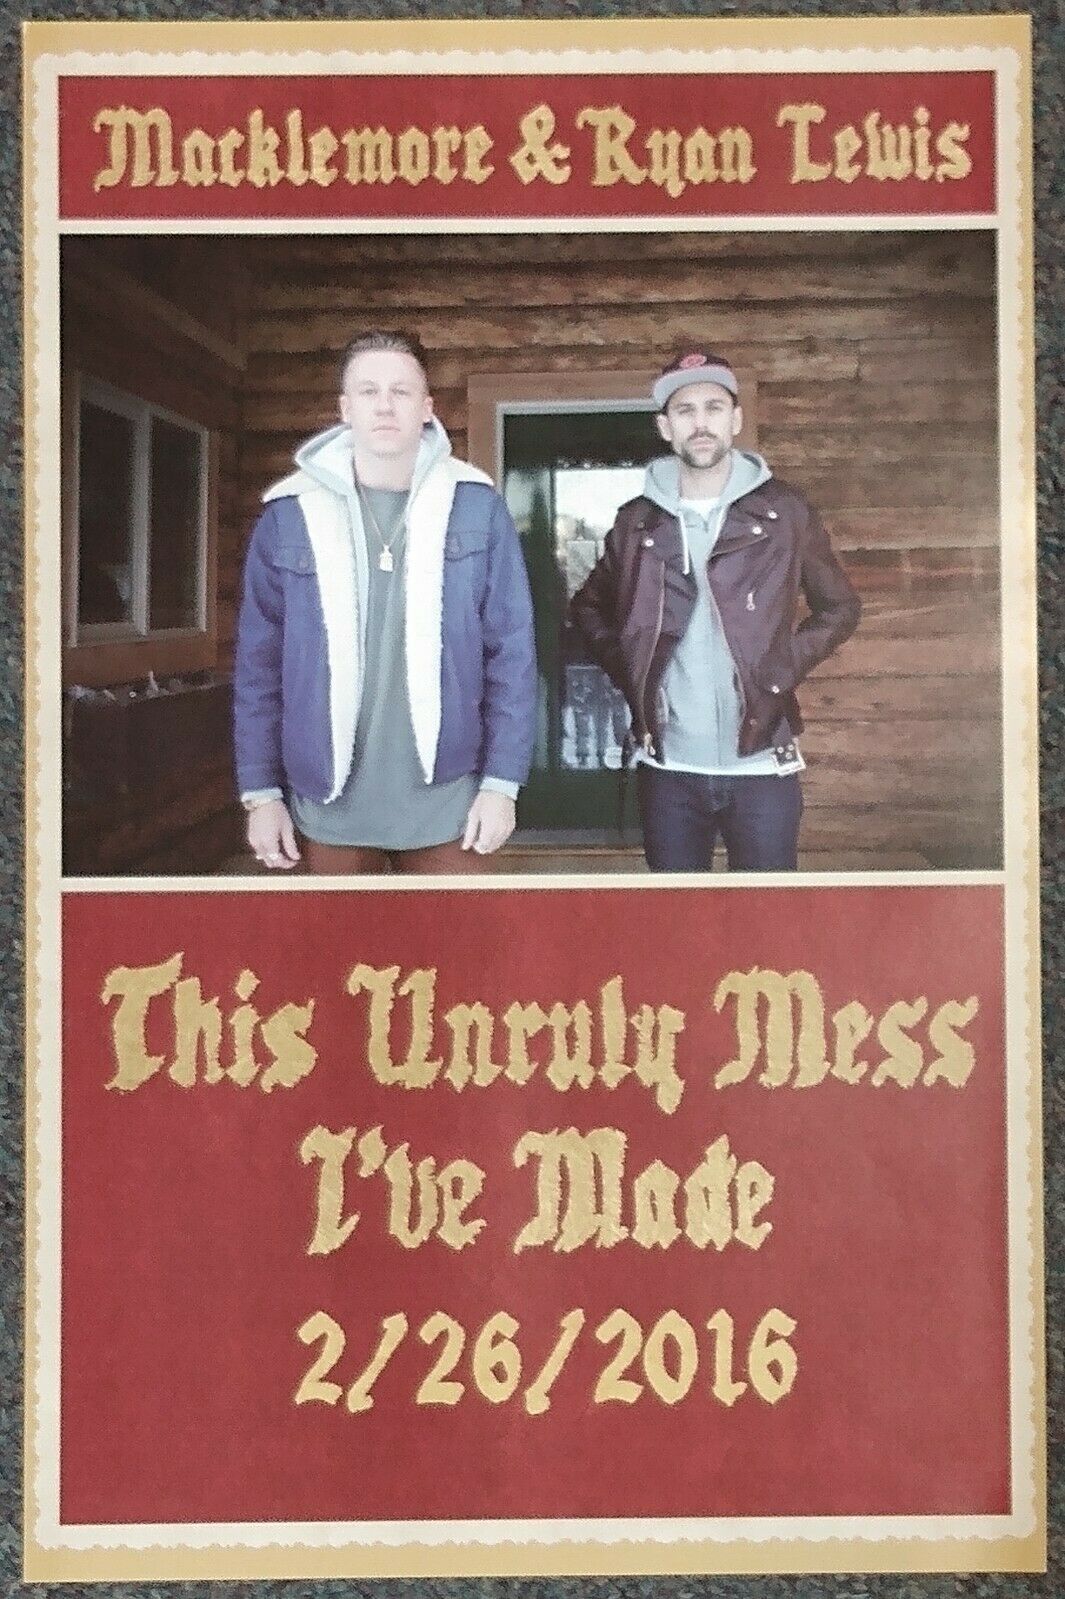 Macklemore & Ryan Lewis This Unruly Mess I’ve Made 2016 PROMO POSTER